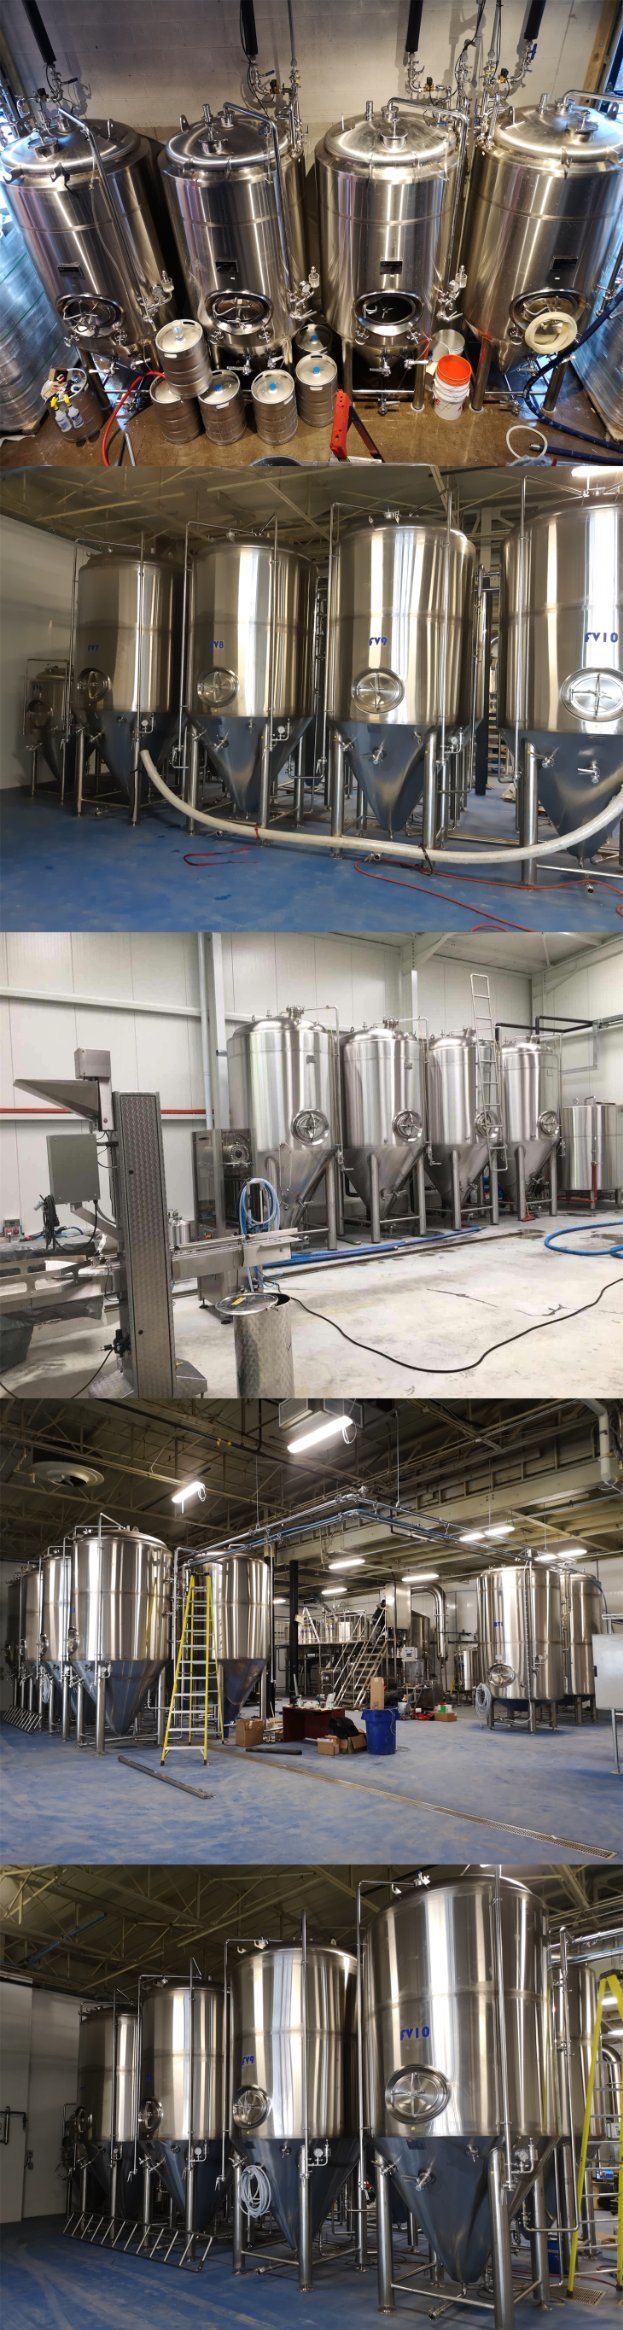 Beer Turnkey Brewery Brew System 7bbl Brewery Equipment Beer Fermenting Turnkey Plant